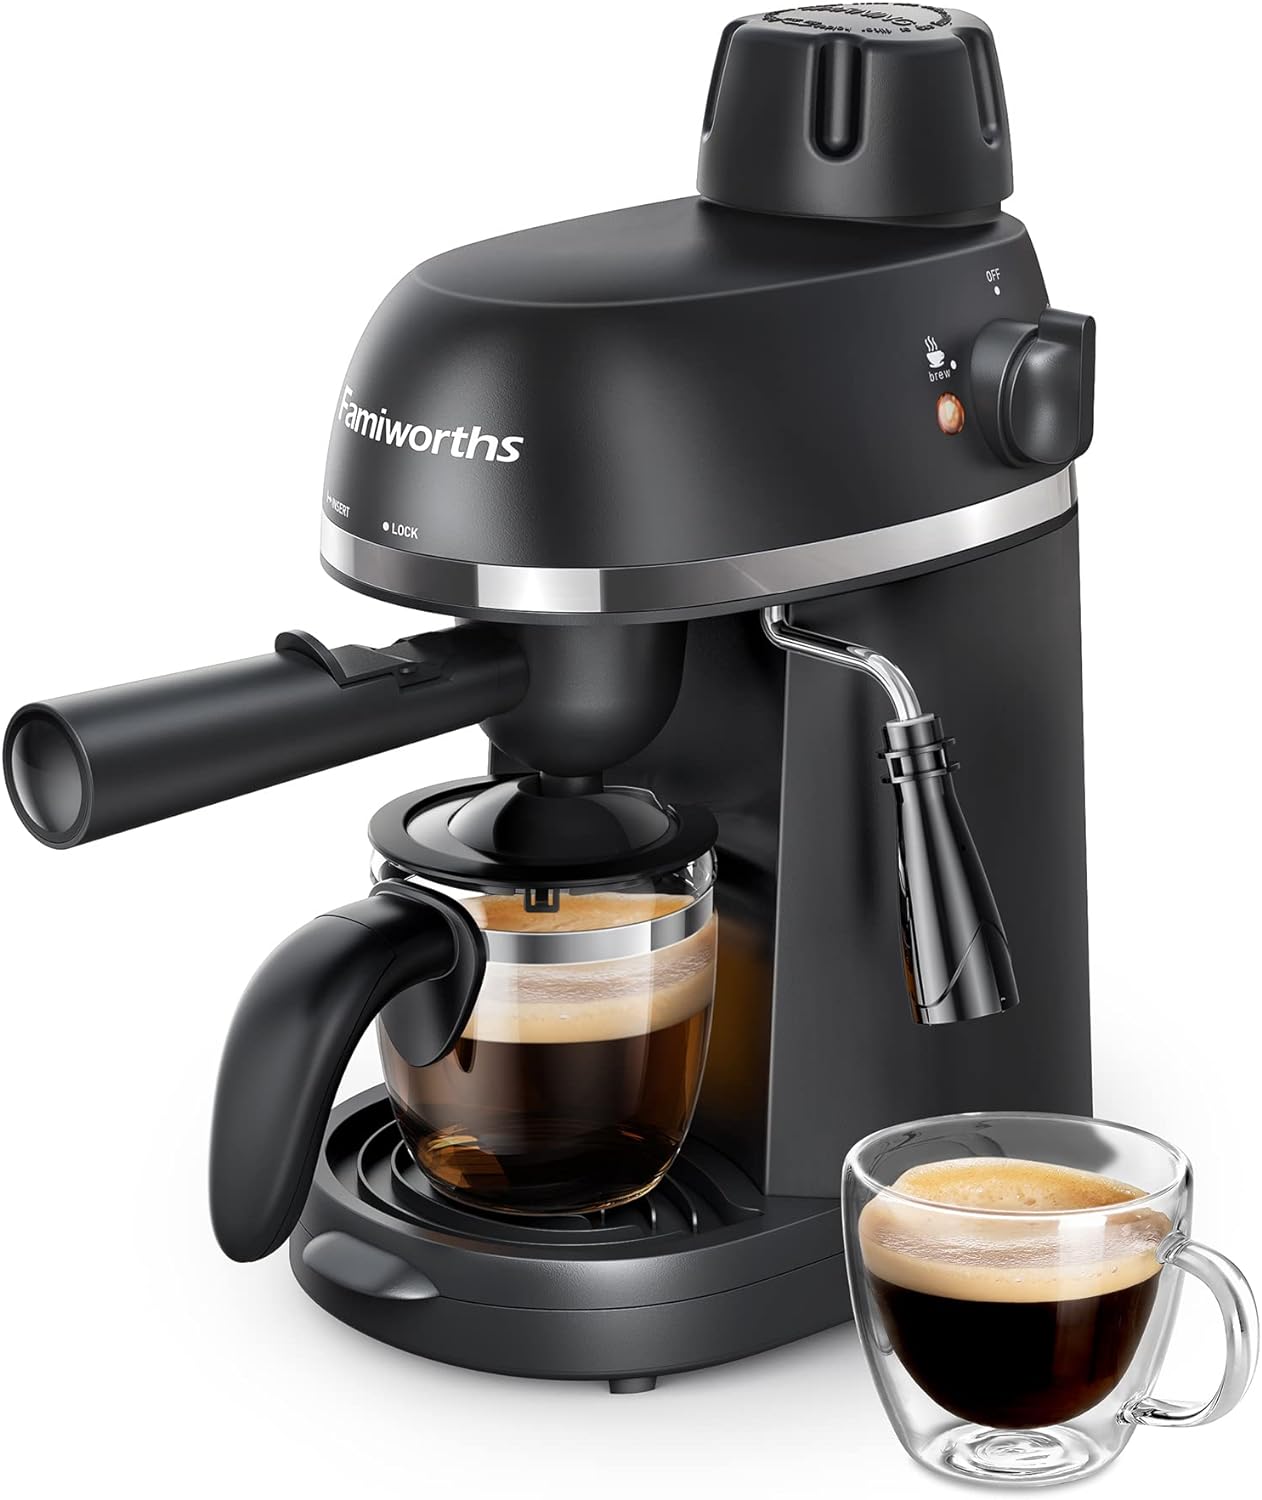 This is the first review I've written but I felt compelled to write one. This is a great machine! After using it for about a year I realize that it' good for those who are new to the coffee game: easy to use, quick brewing, relatively easy to clean, and churns out reliable flavor. You can add whatever you like (I've learned that with fine grinds you shouldn't compress the powder as much or else it'll almost-halve the amount of coffee you intend to make). Just be sure to let all components 